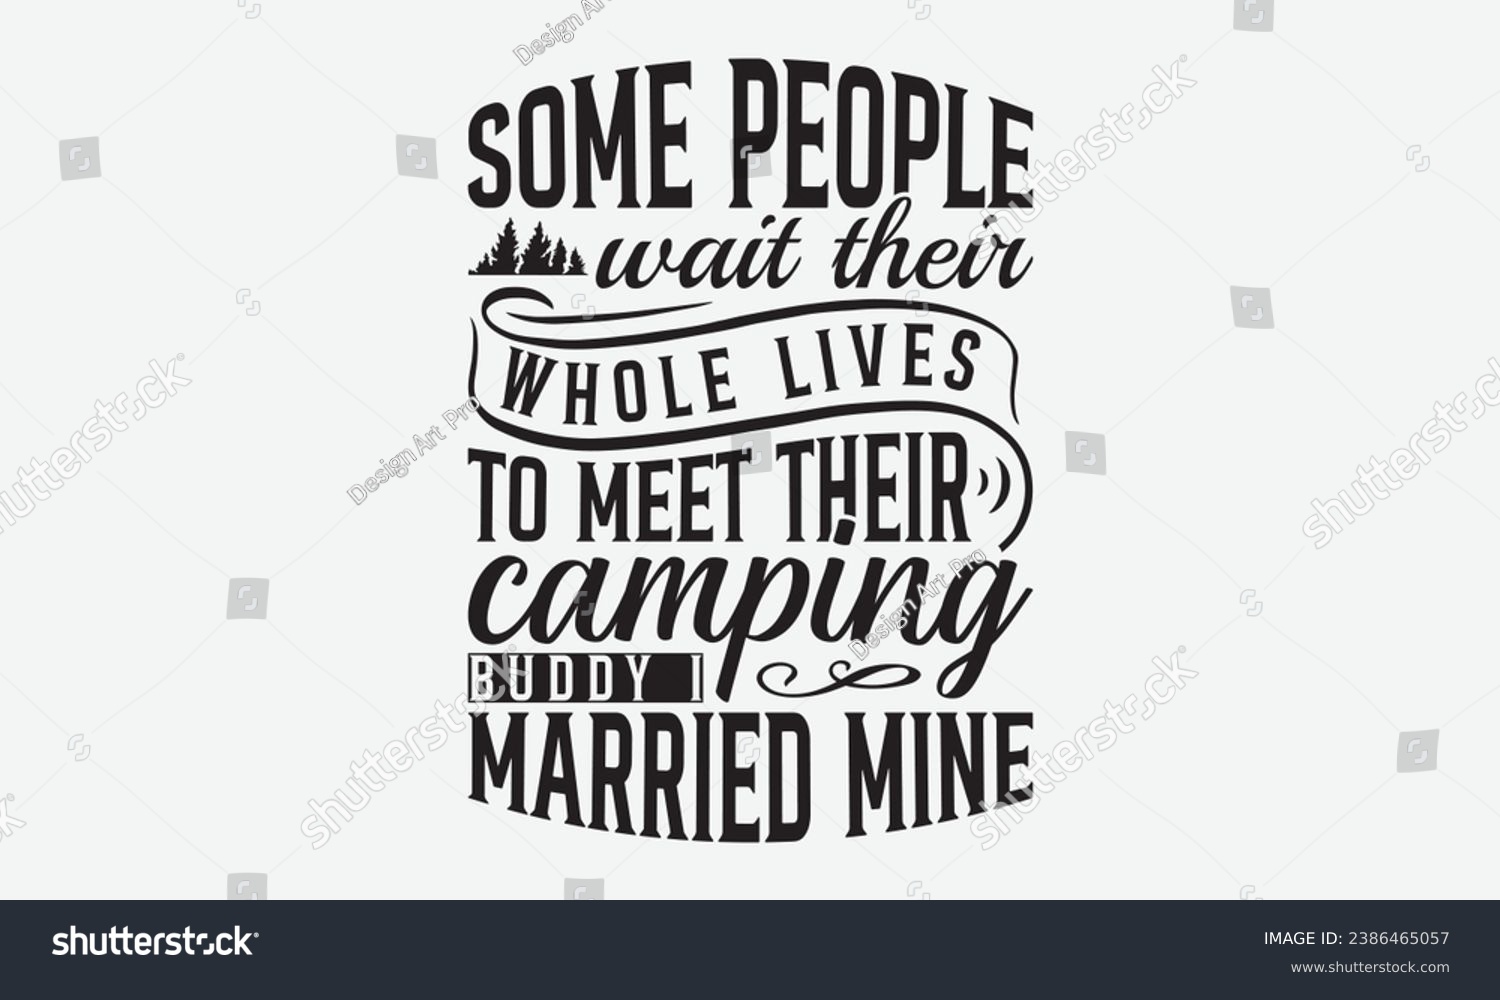 SVG of Some people wait their whole lives to meet their camping buddy I married mine -Camping T-Shirt Design, Hand-Drawn Lettering Illustration, For  Phrases, Poster, Hoodie, Templates, And Flyer, Cutti. svg